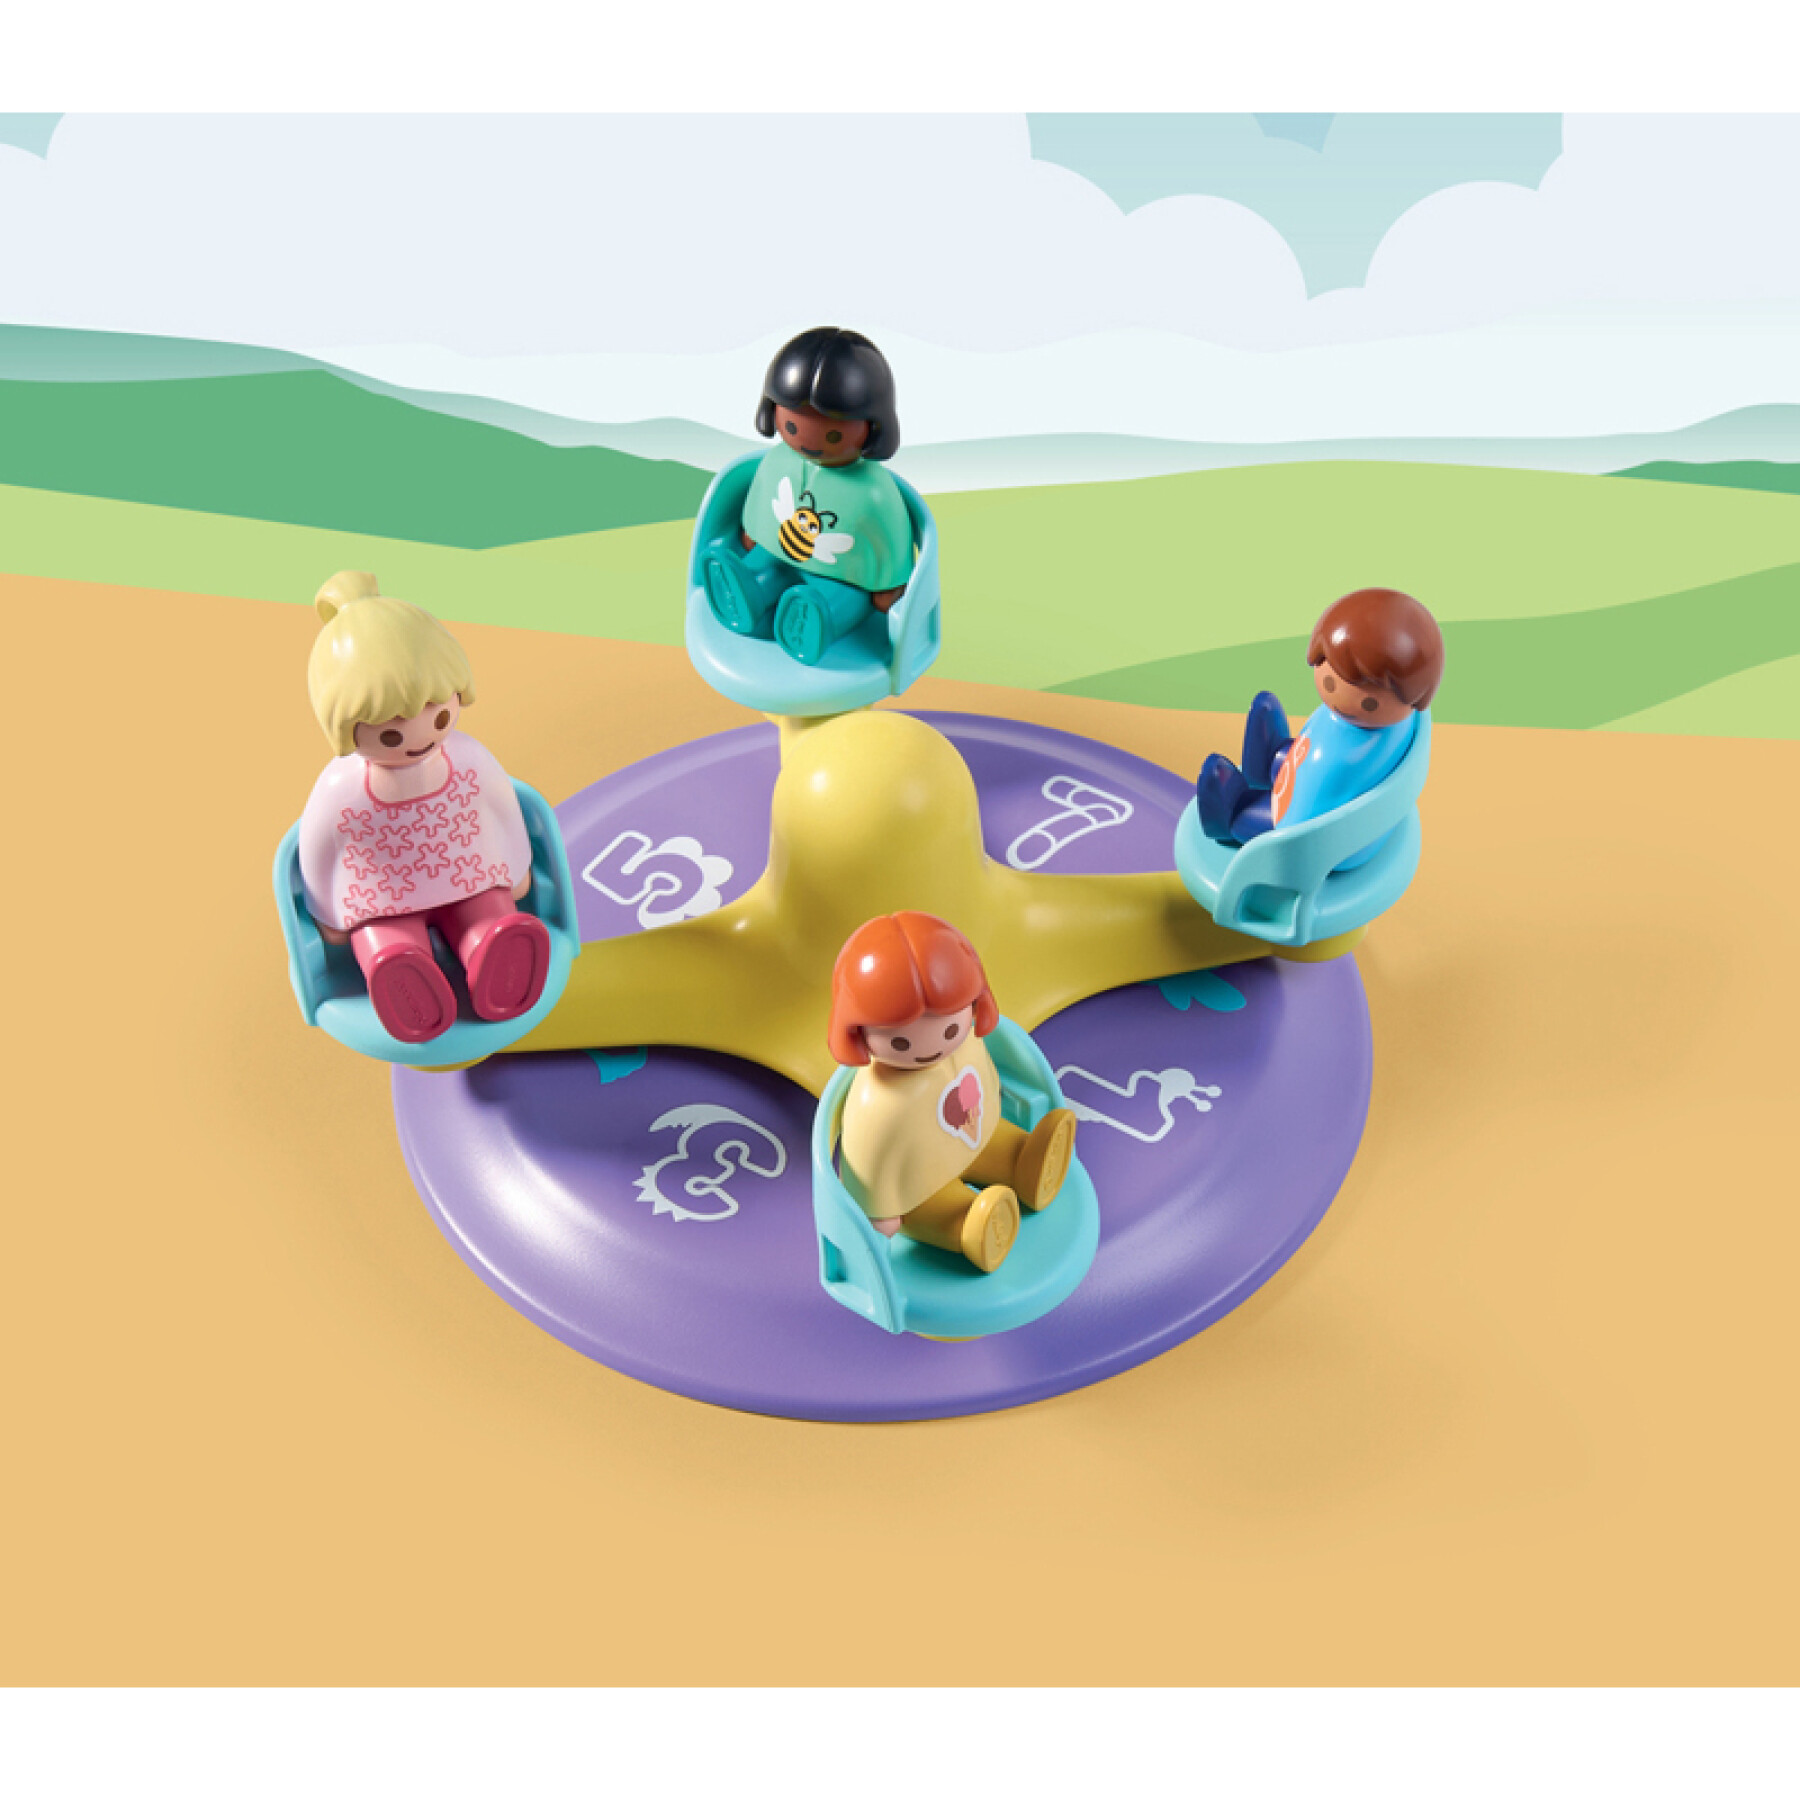 Early-learning games with turnstile Playmobil 123